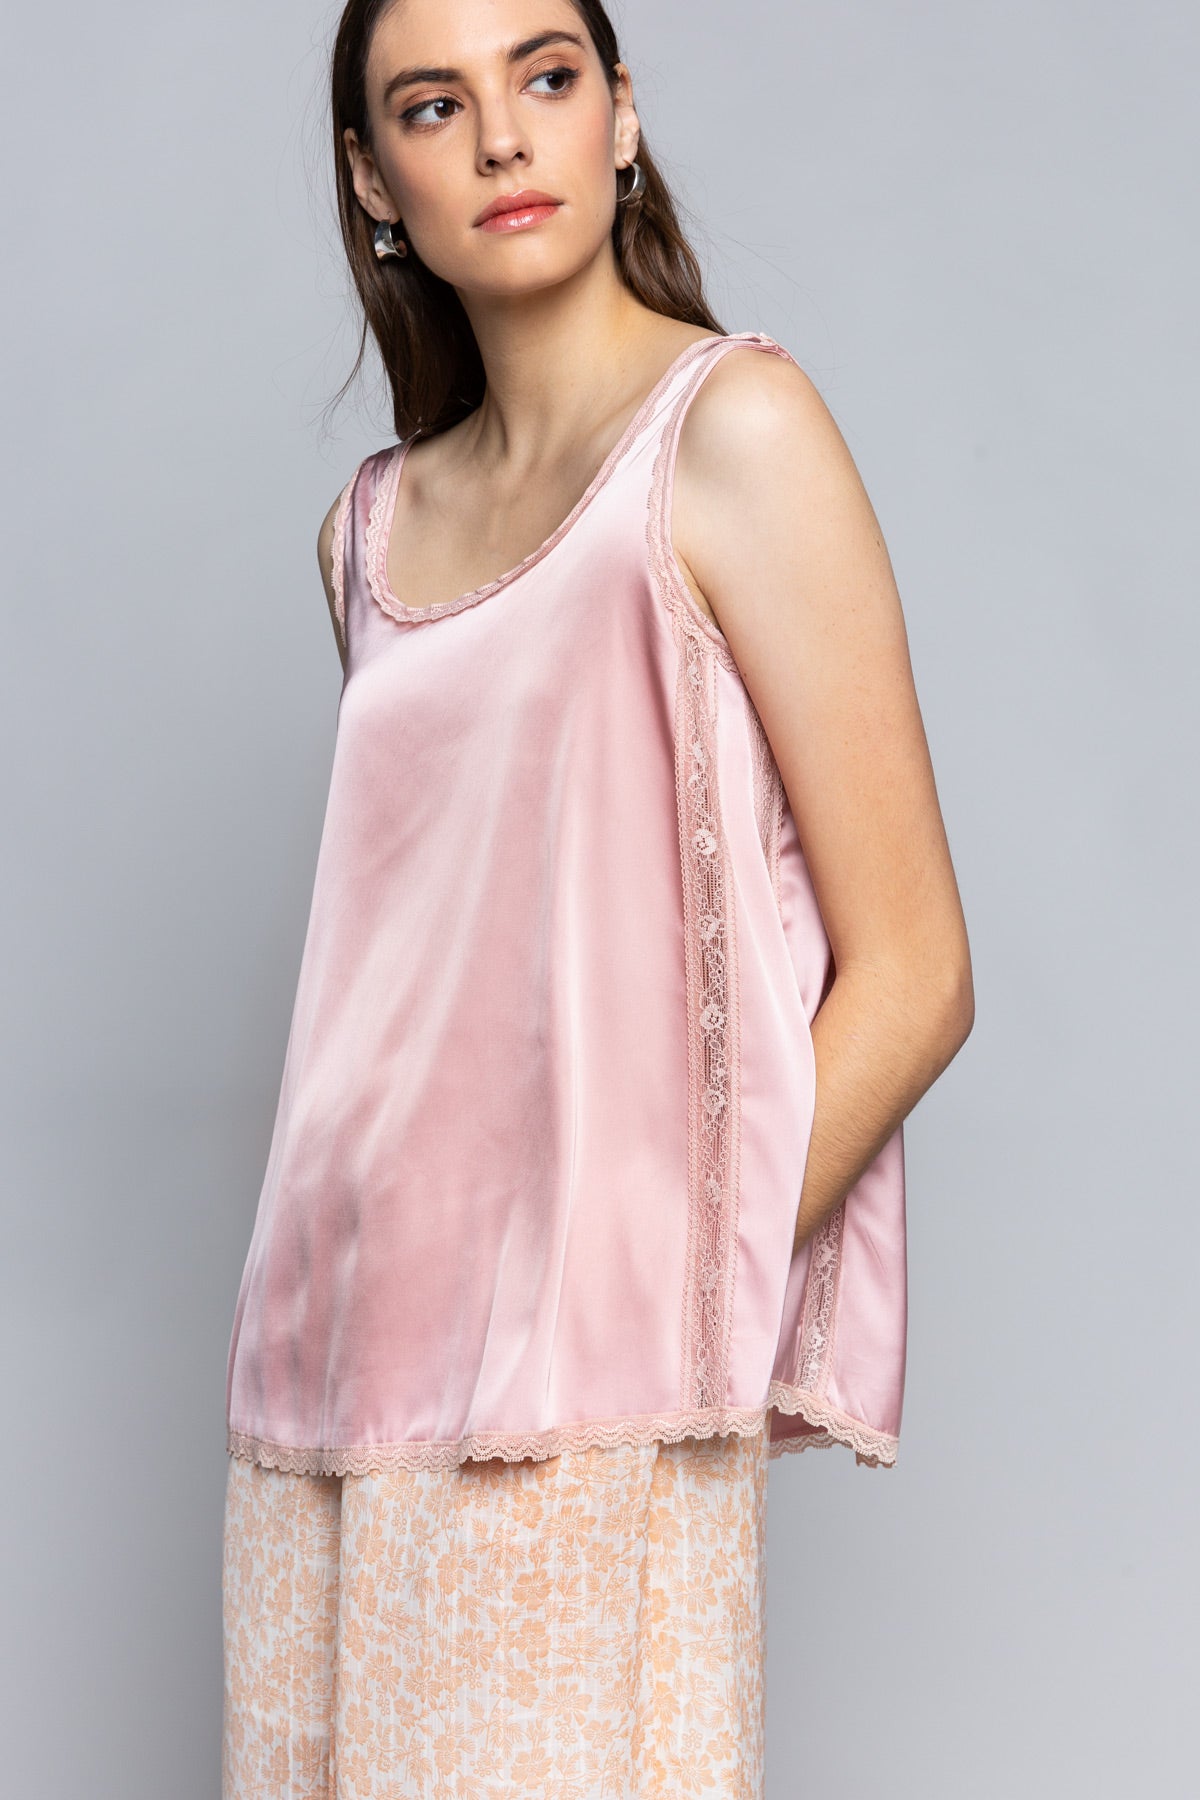 POL Soft and Flowy Satin Pink Top with Lace Details!